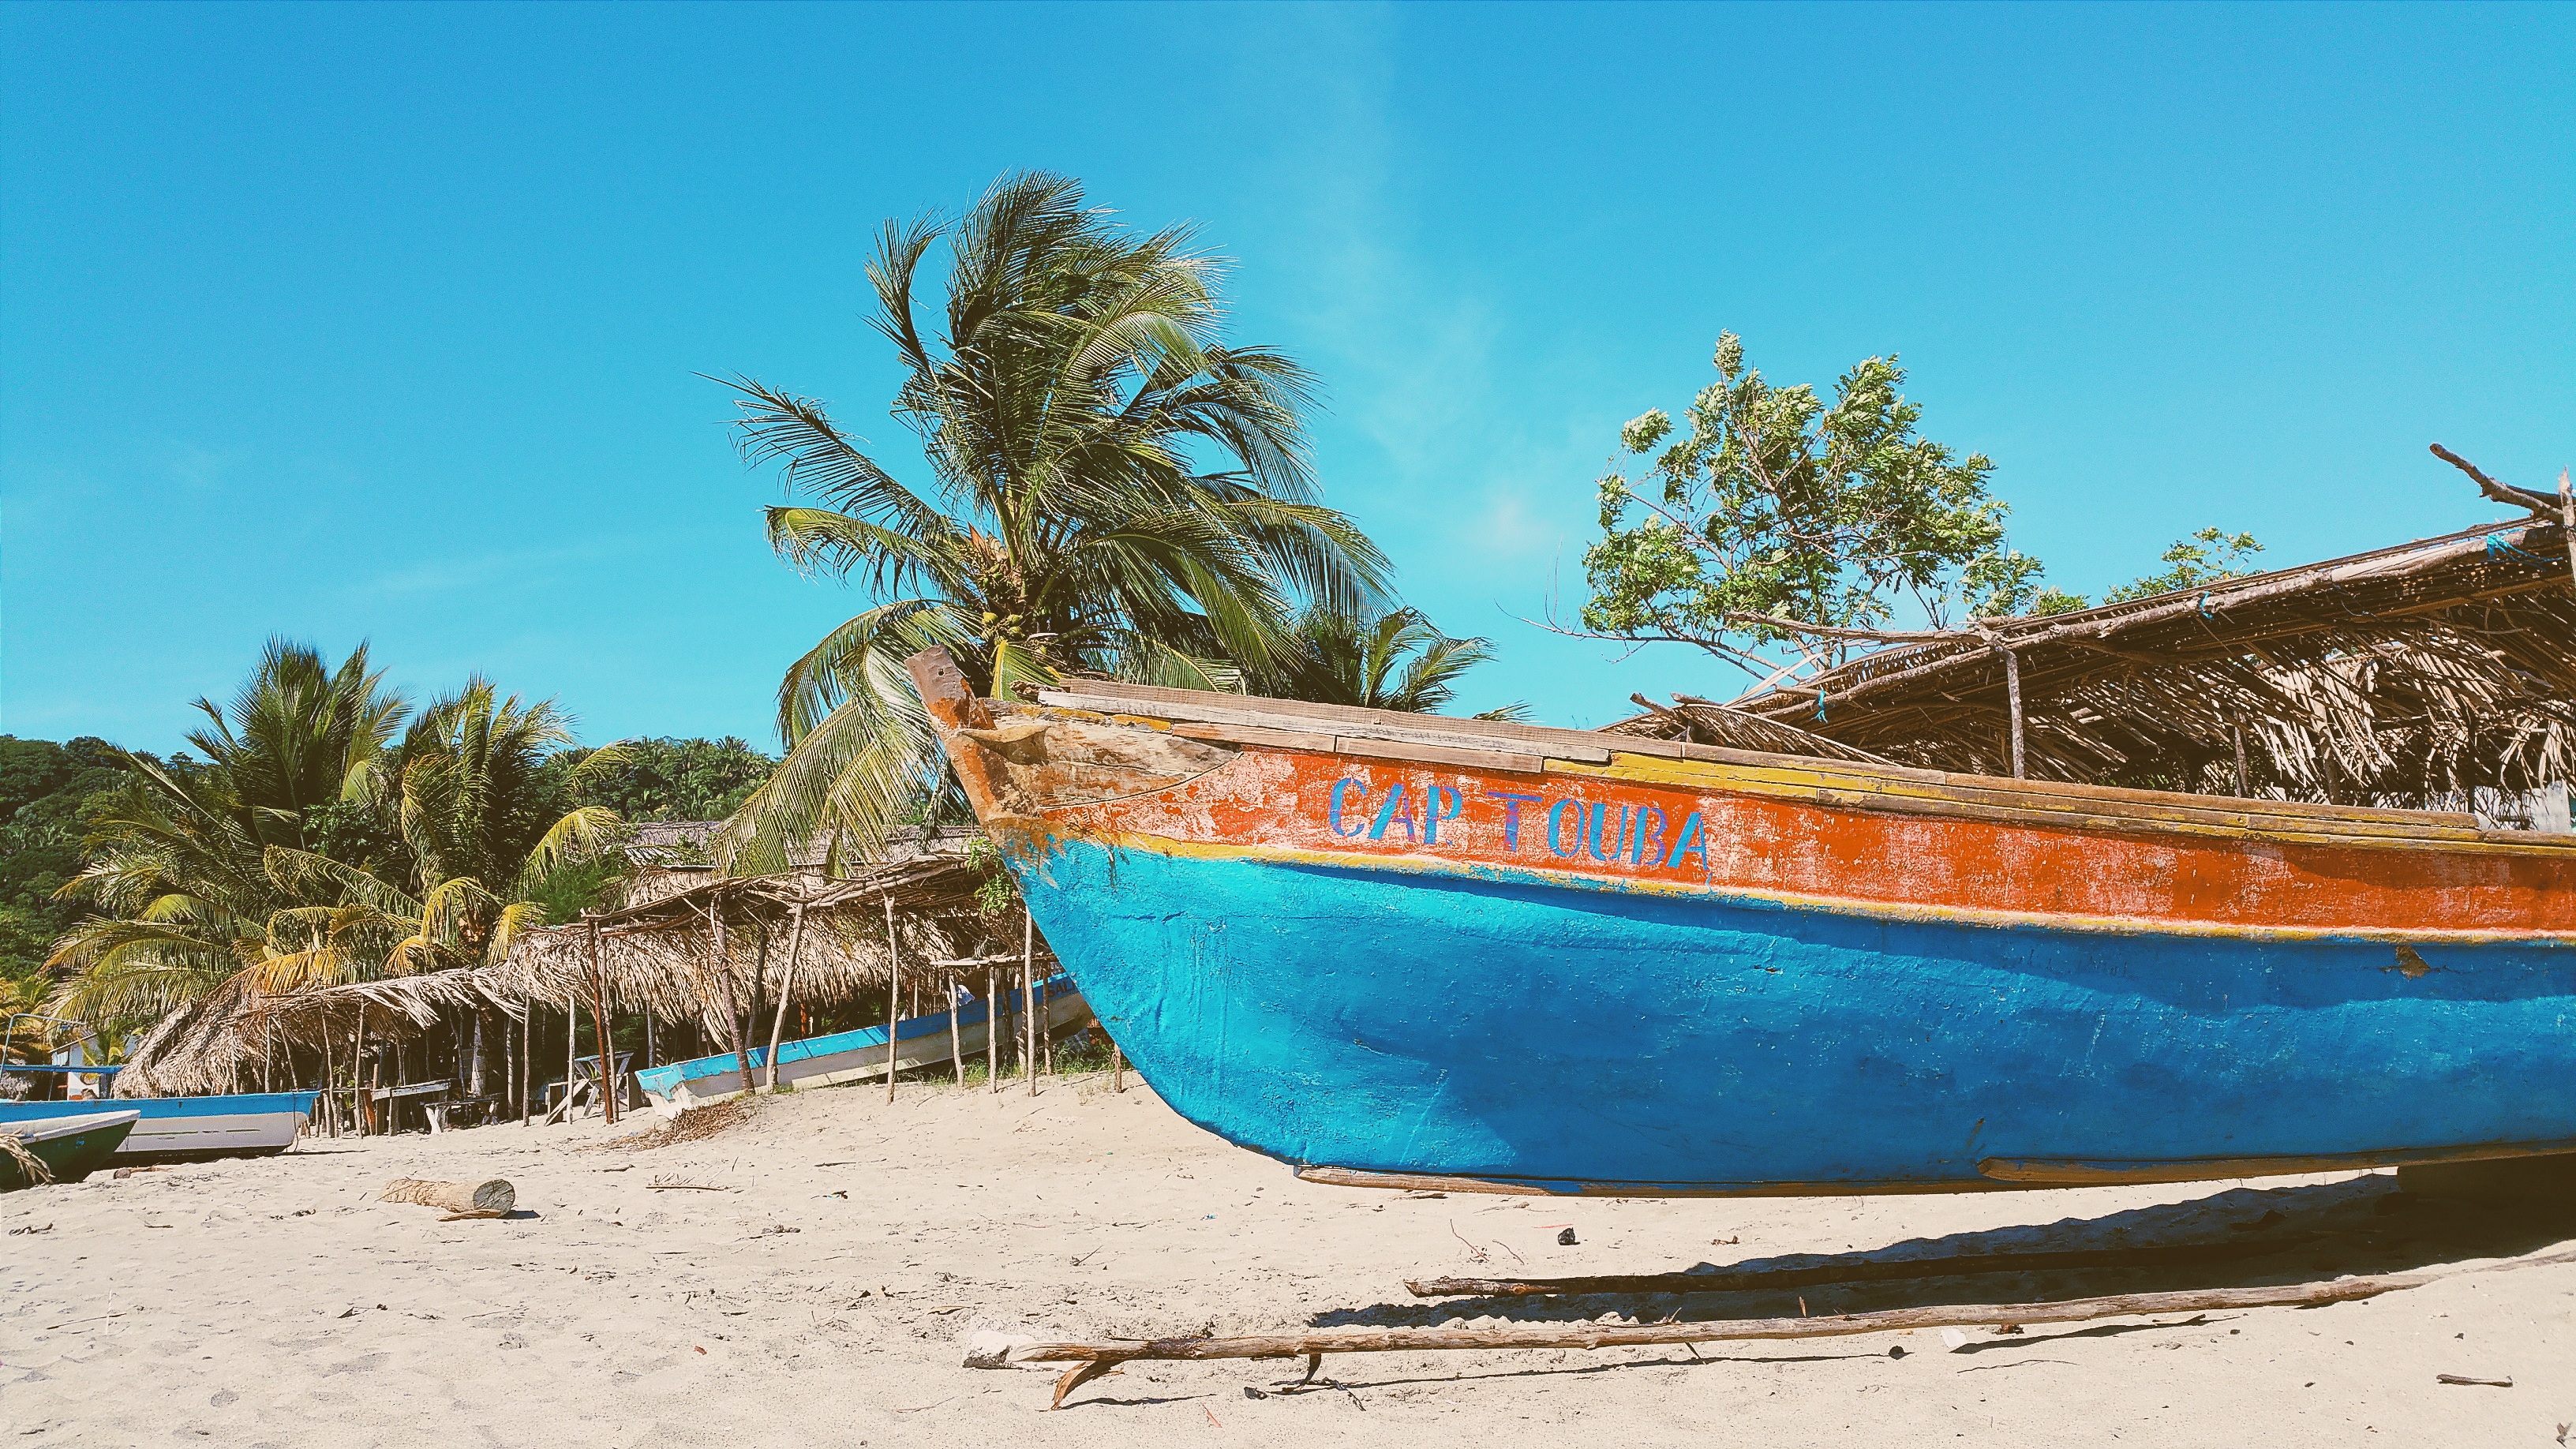 Free photo An old abandoned boat on a beach with palm trees